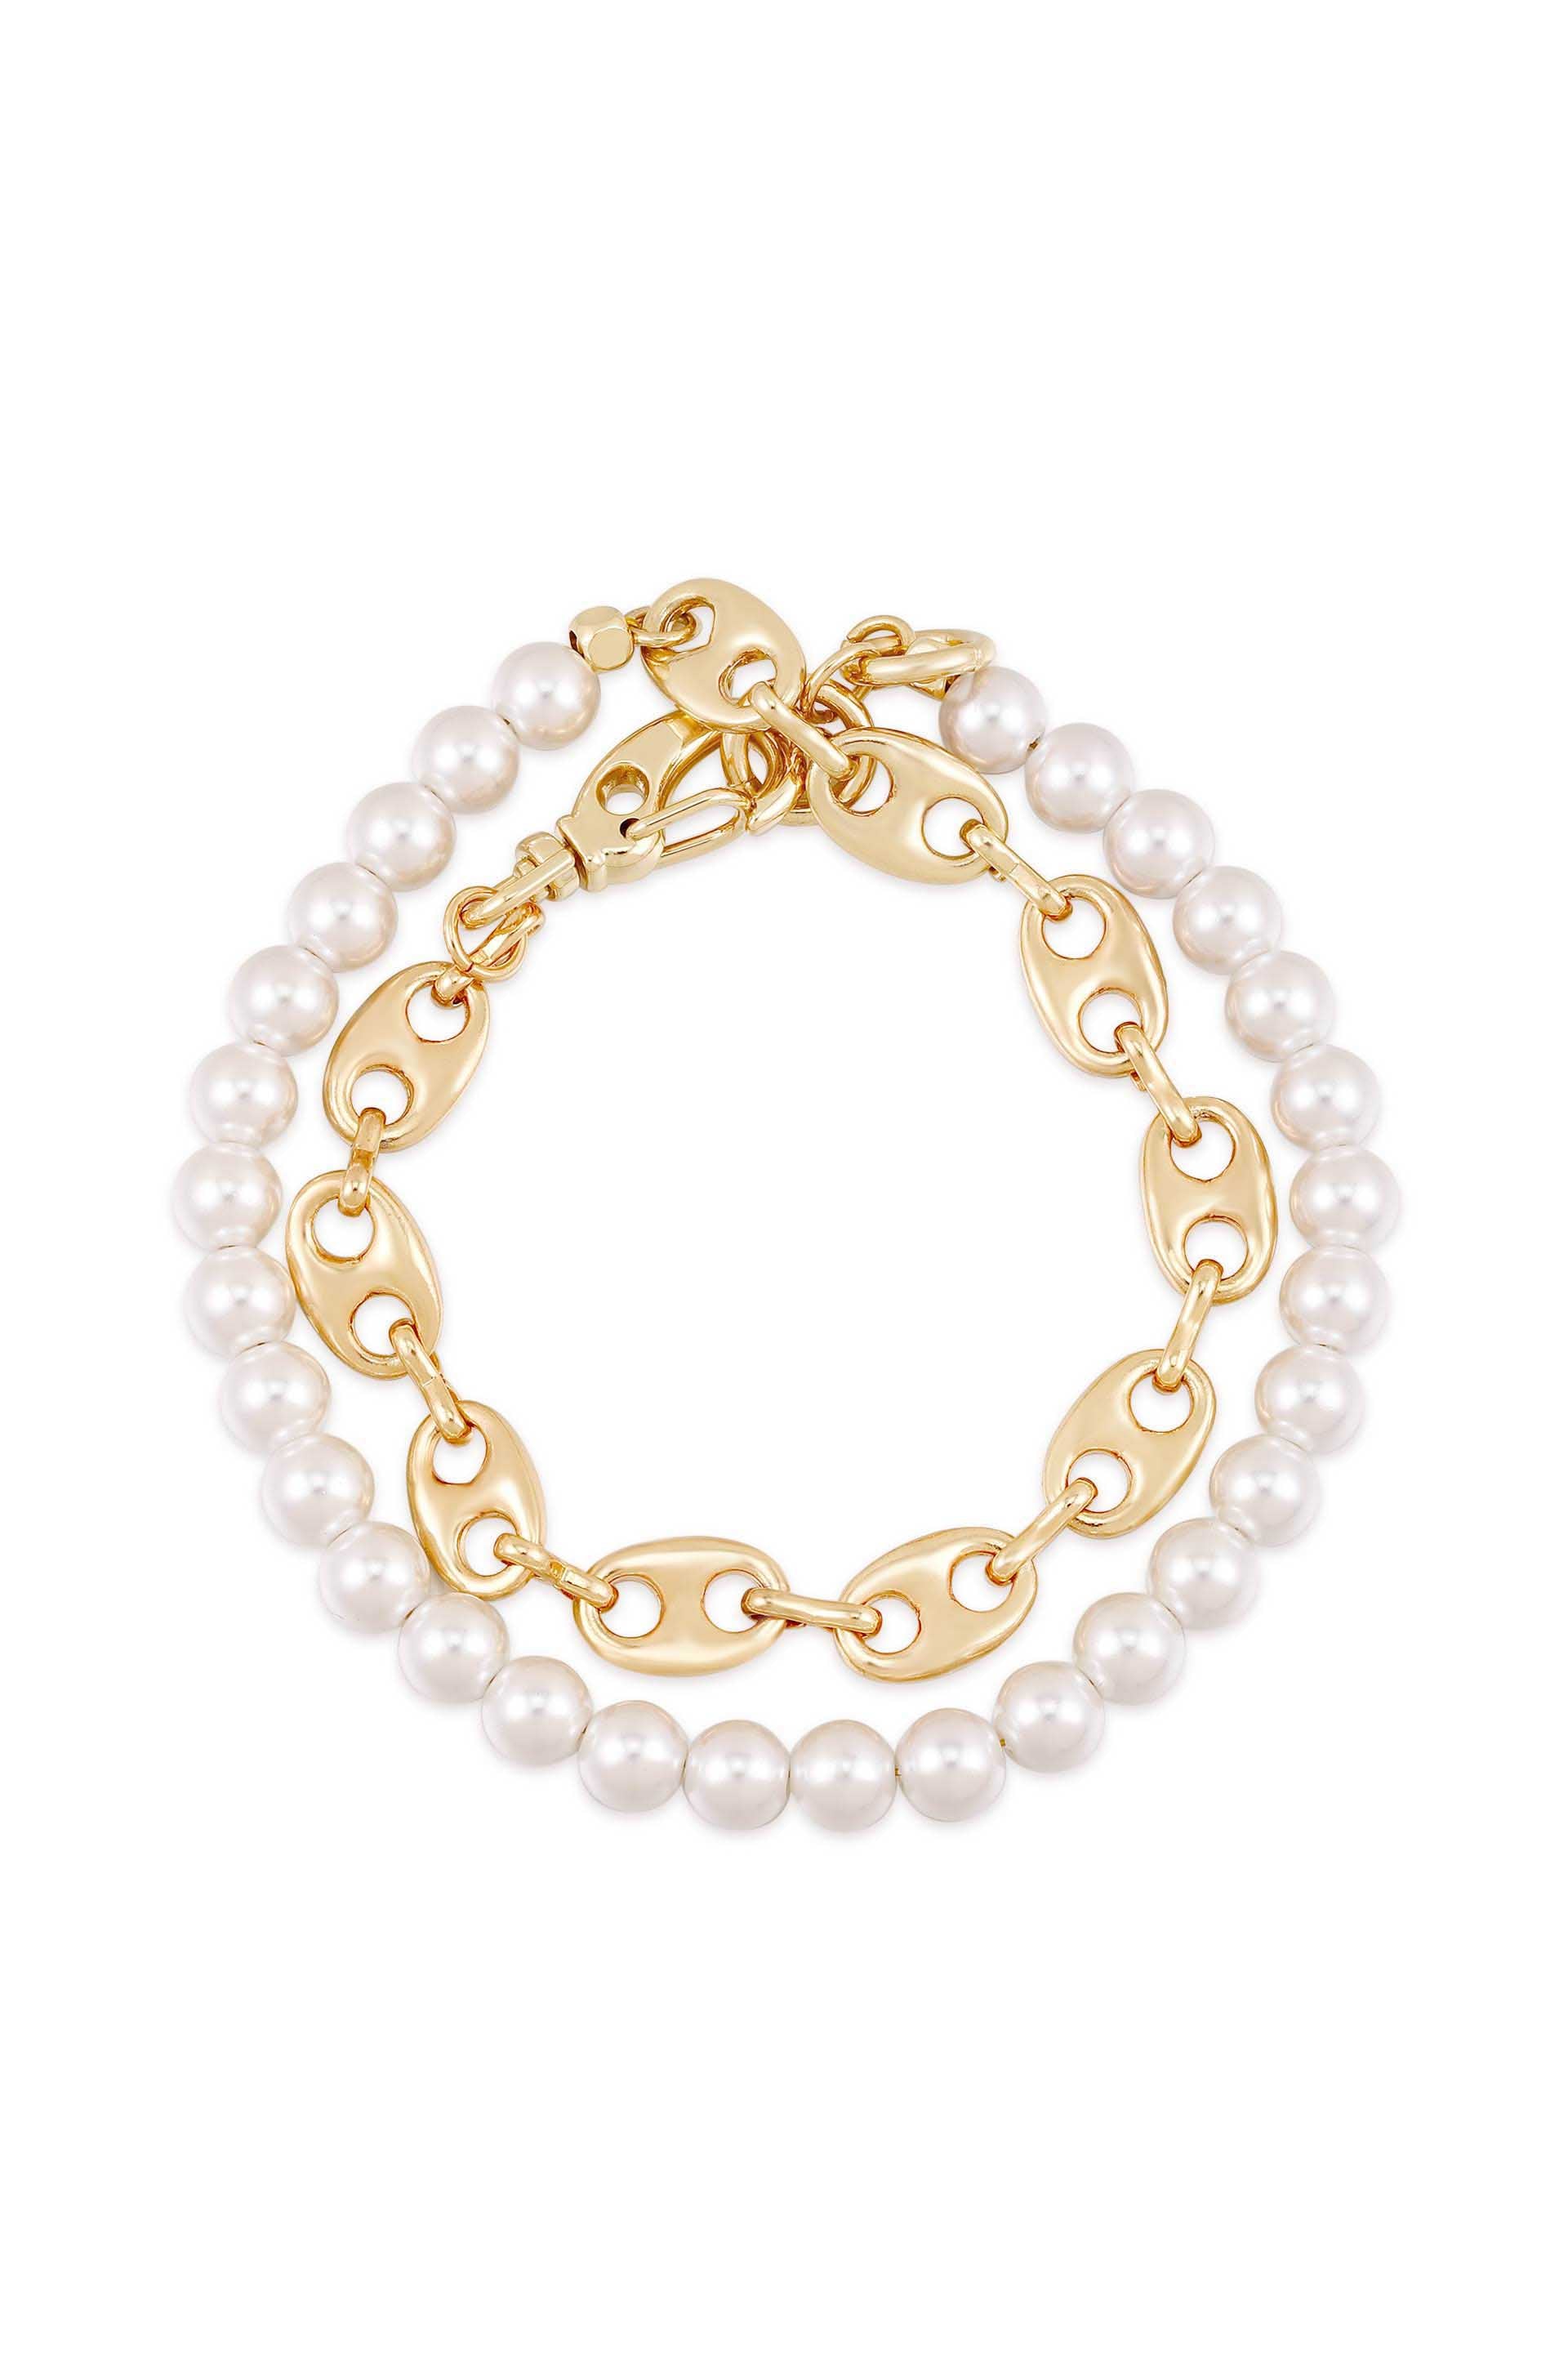 Pearl and Modern Chain Link Wrap Bracelet